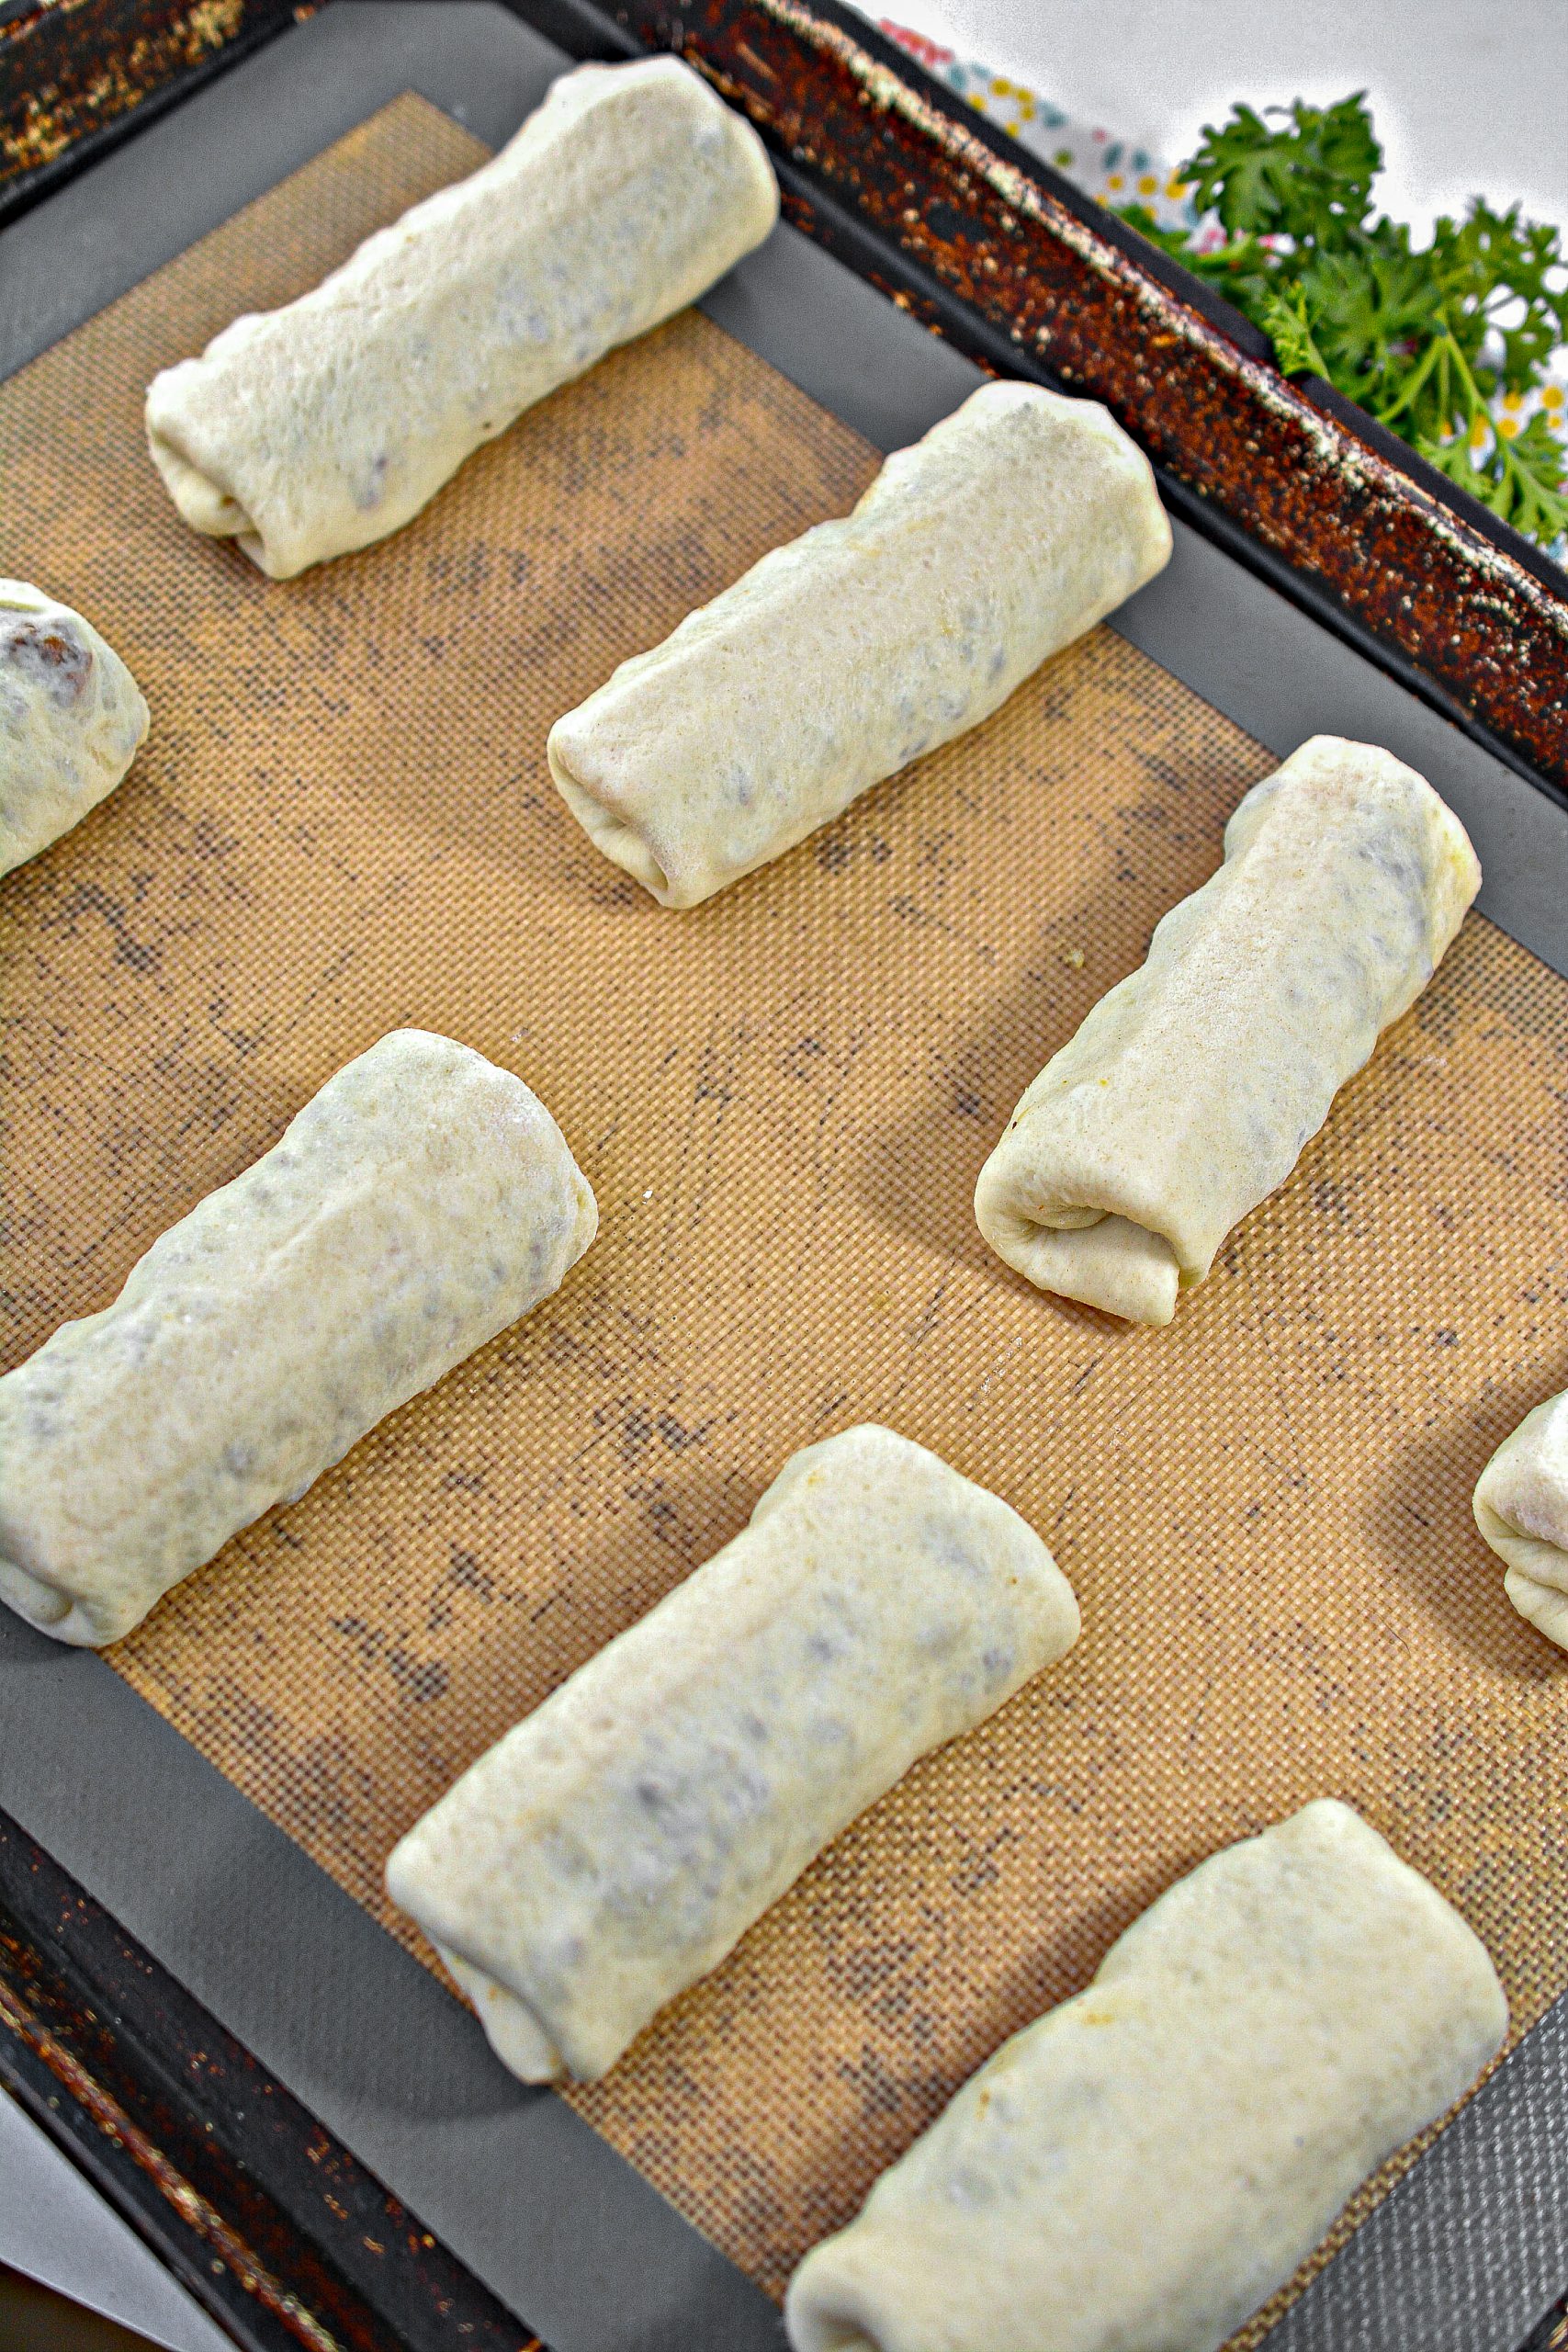 Carefully fold in the ends of each rectangle of dough, and then roll them into breadsticks over the filling.